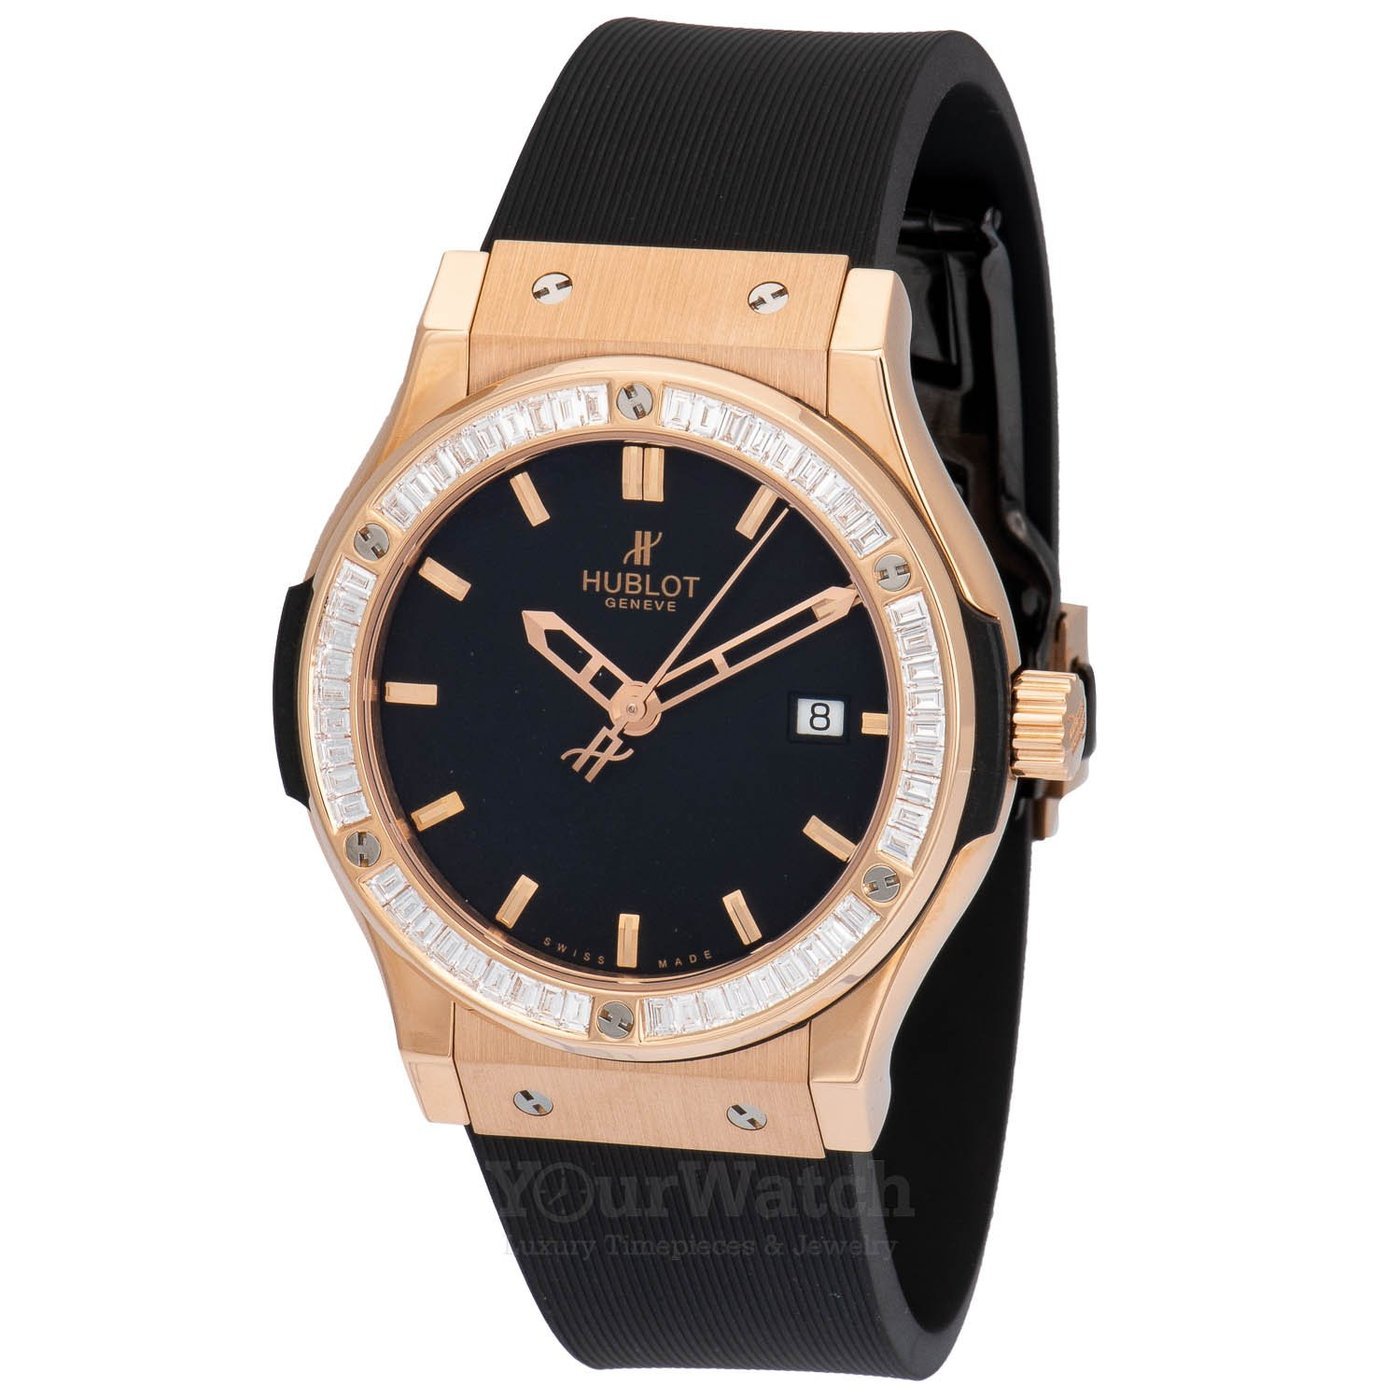 Hublot-Classic-Fusion-42mm-Mens-Watch-with-Baguette-Diamonds-542PX1180RX1904-Yourwatch